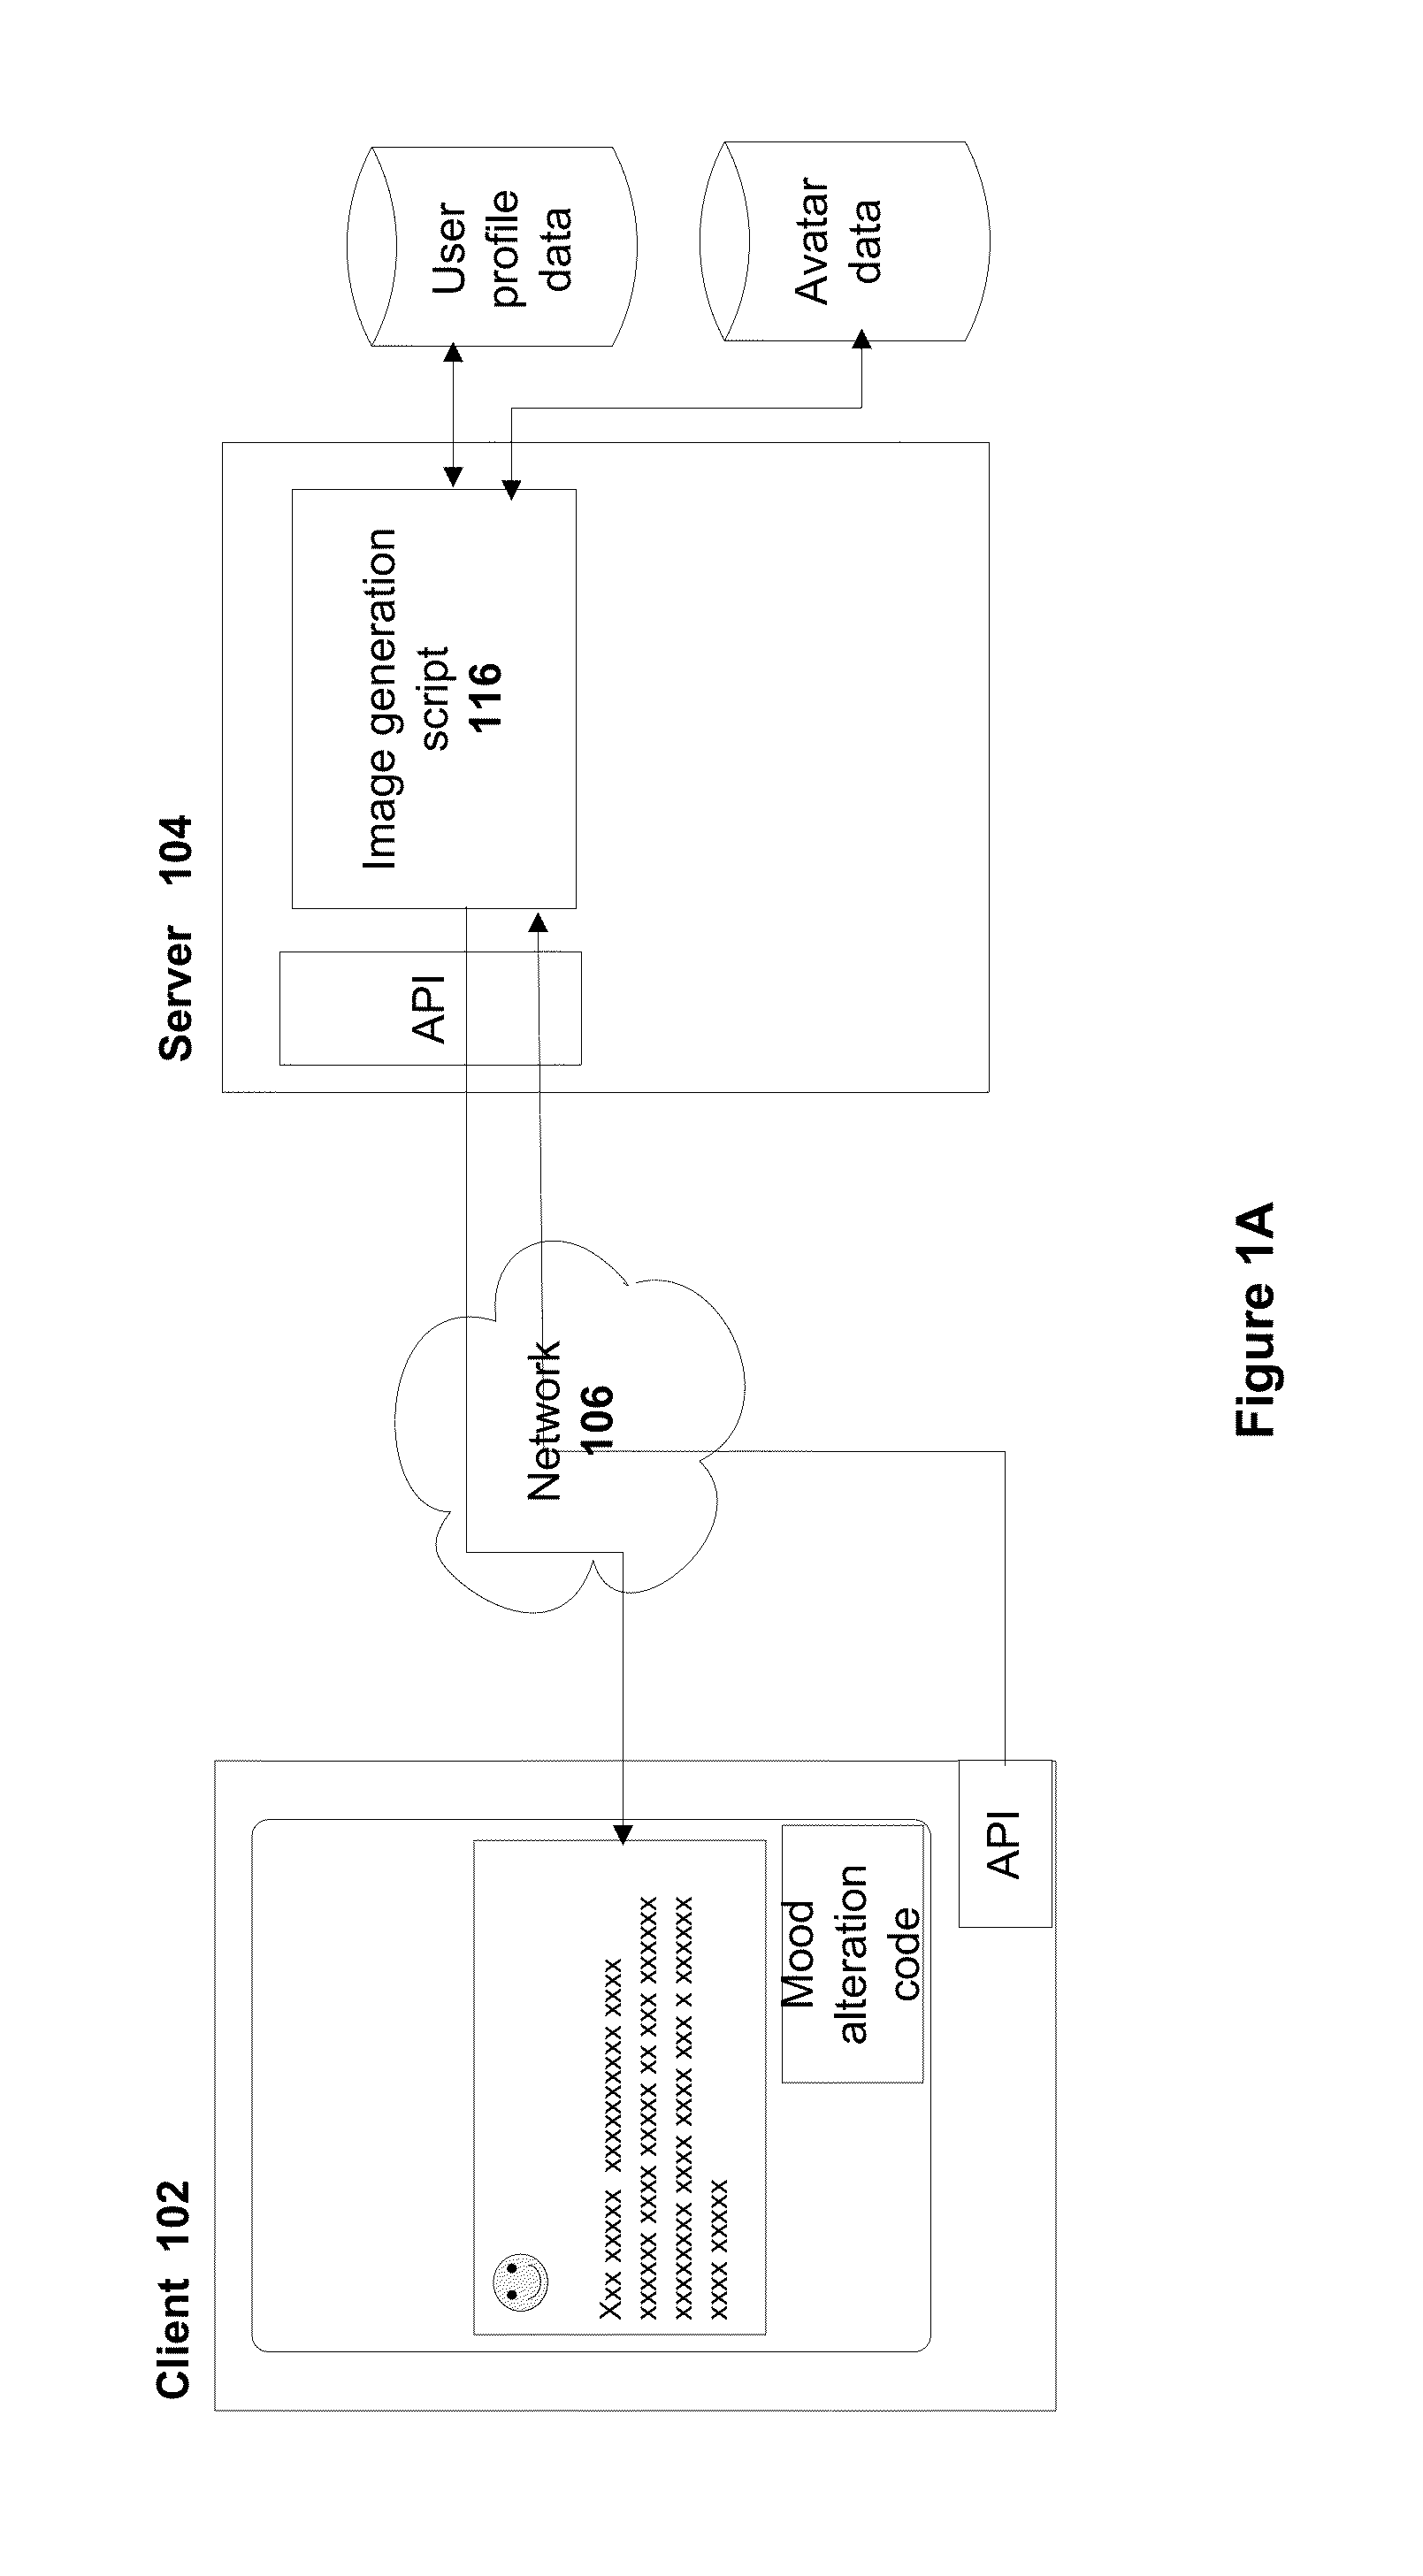 System and Method for Generating Contextual User-Profile Images